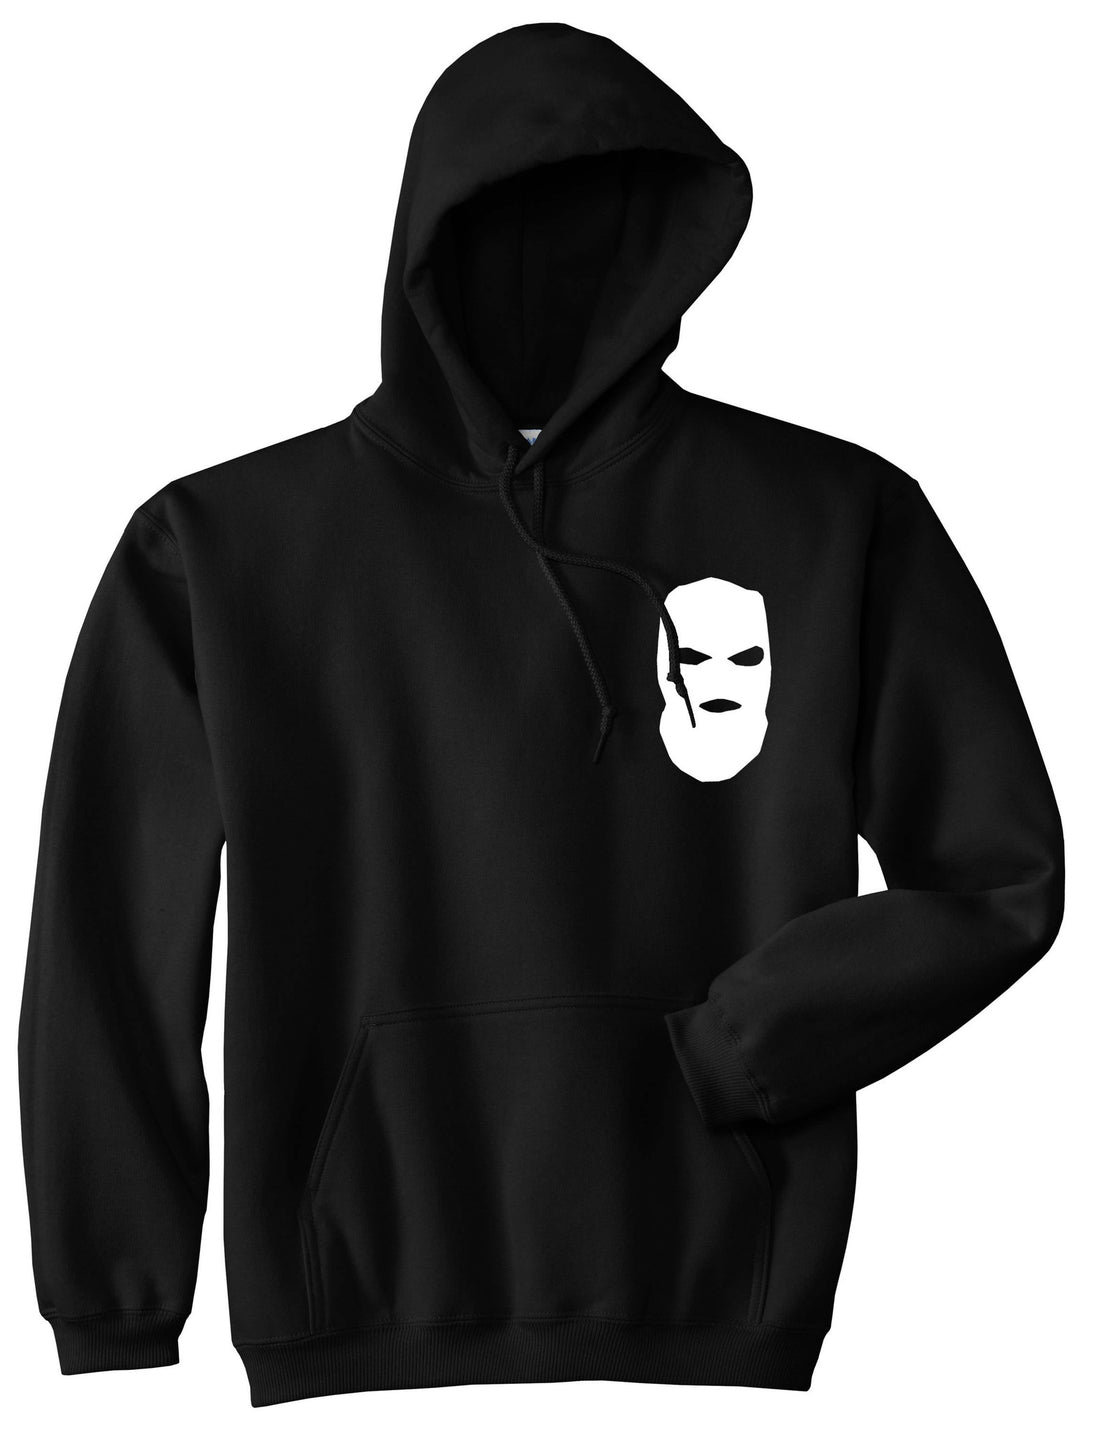 Ski Mask Way Robber Chest Logo Boys Kids Pullover Hoodie Hoody in Black By Kings Of NY